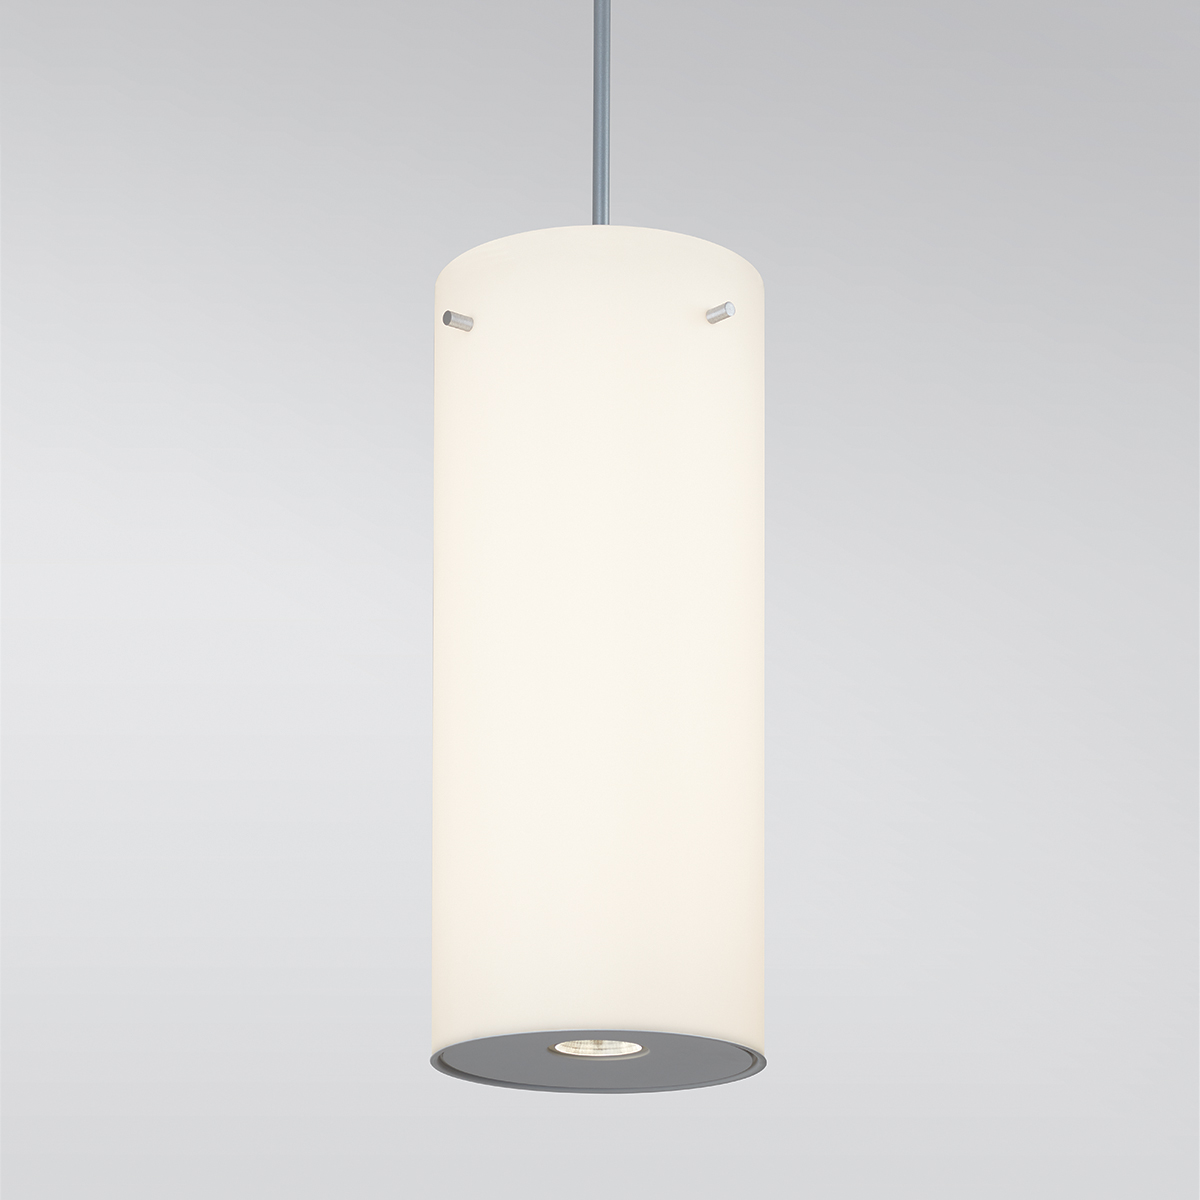 A large, luminous cylinder pendant with a pin accent